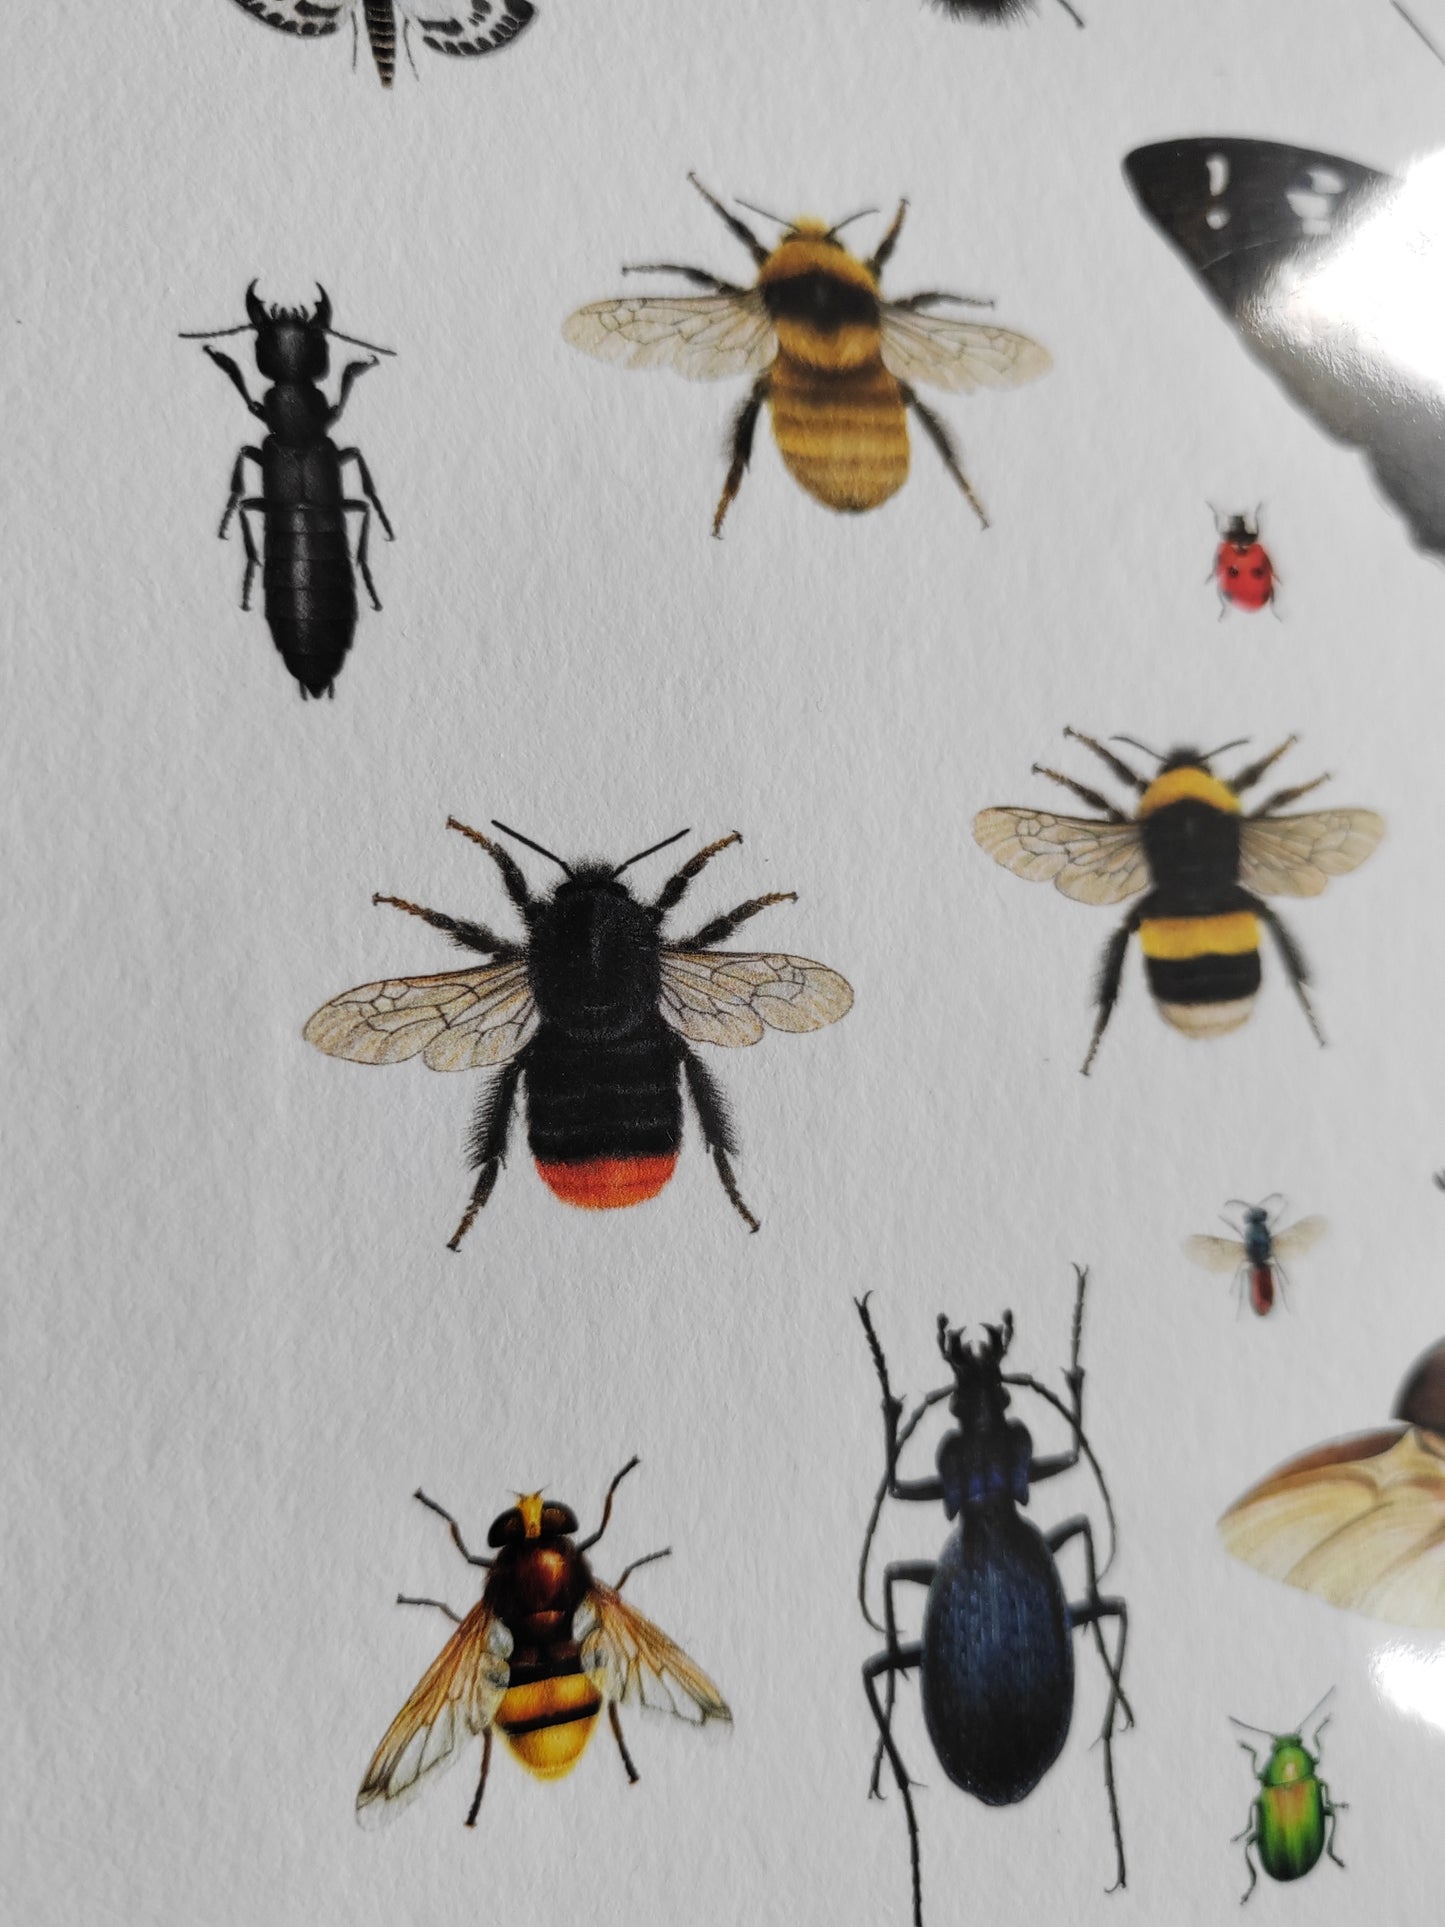 British Insects Lifesize compilation 1 (limited edition art print)